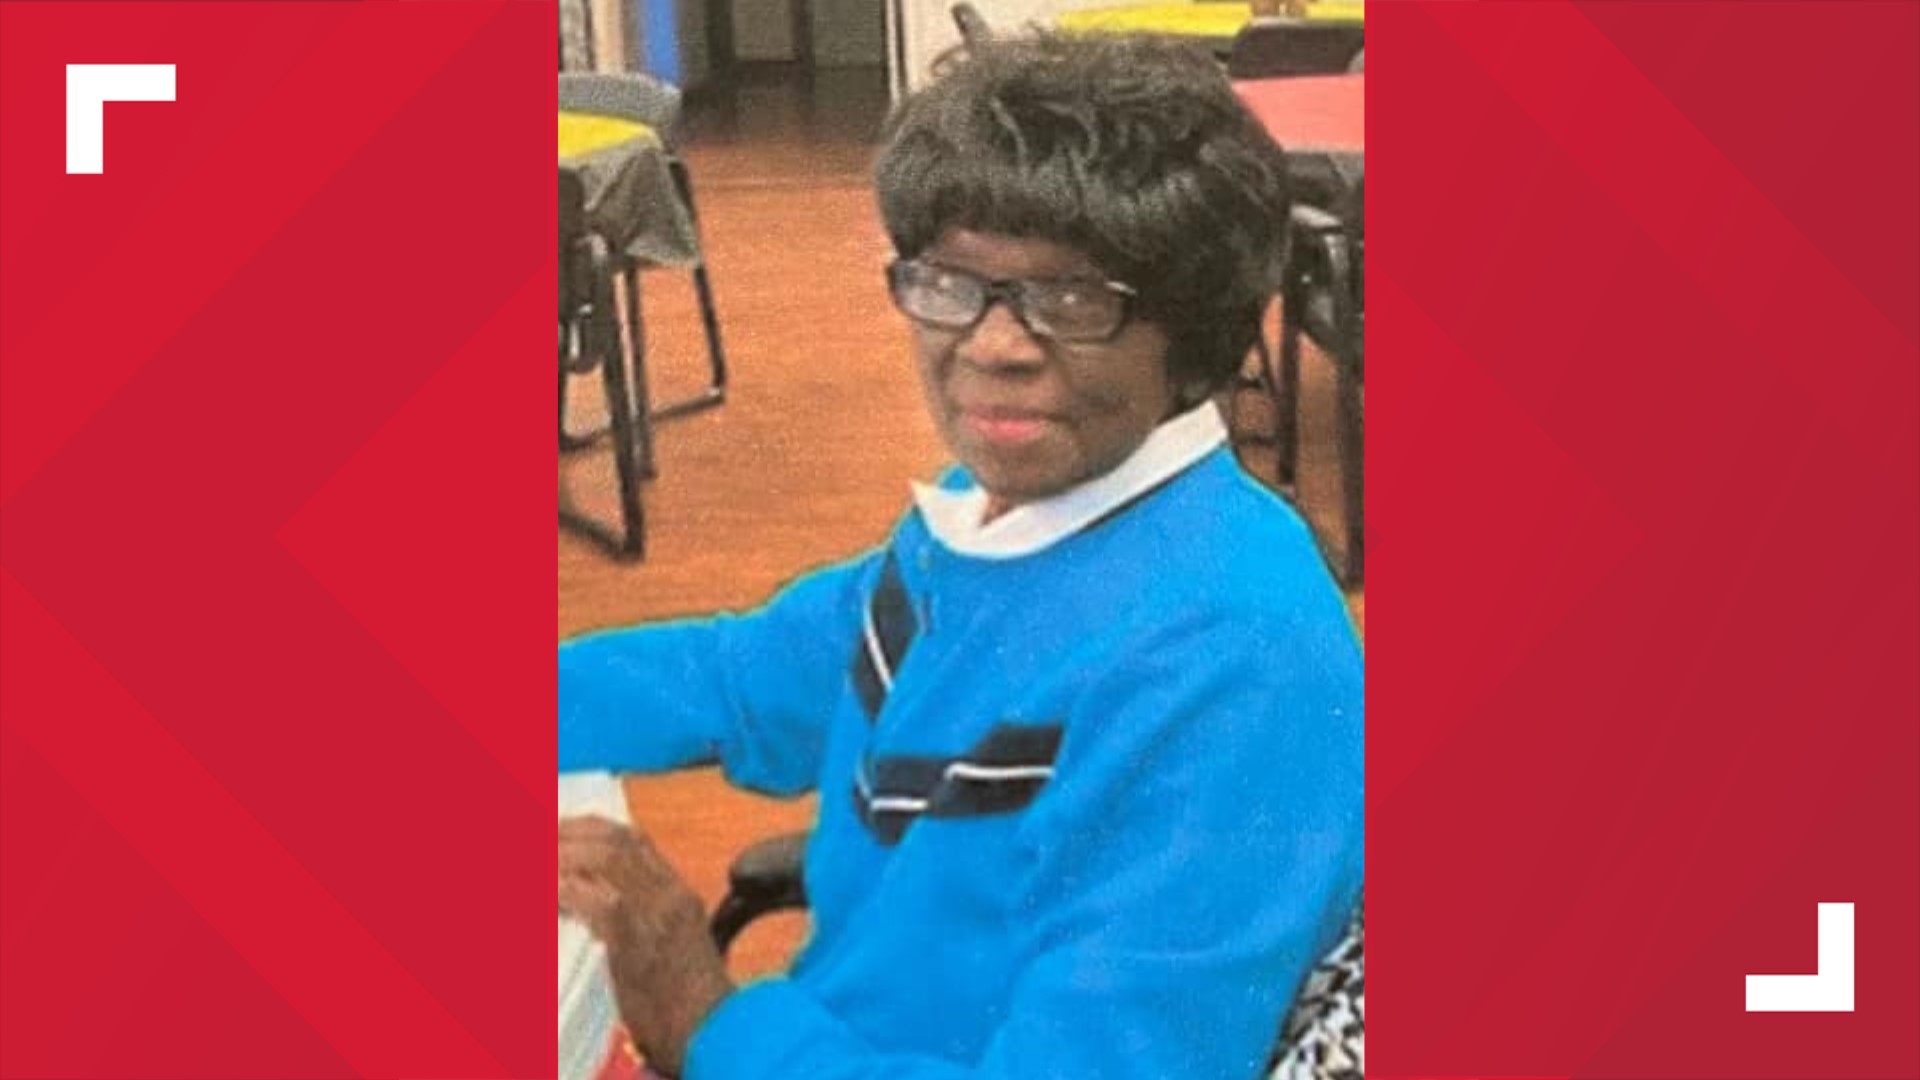 A missing Eastover woman who hadn't been seen since Tuesday has been found in Calhoun County - not far from where her car was found a day before.